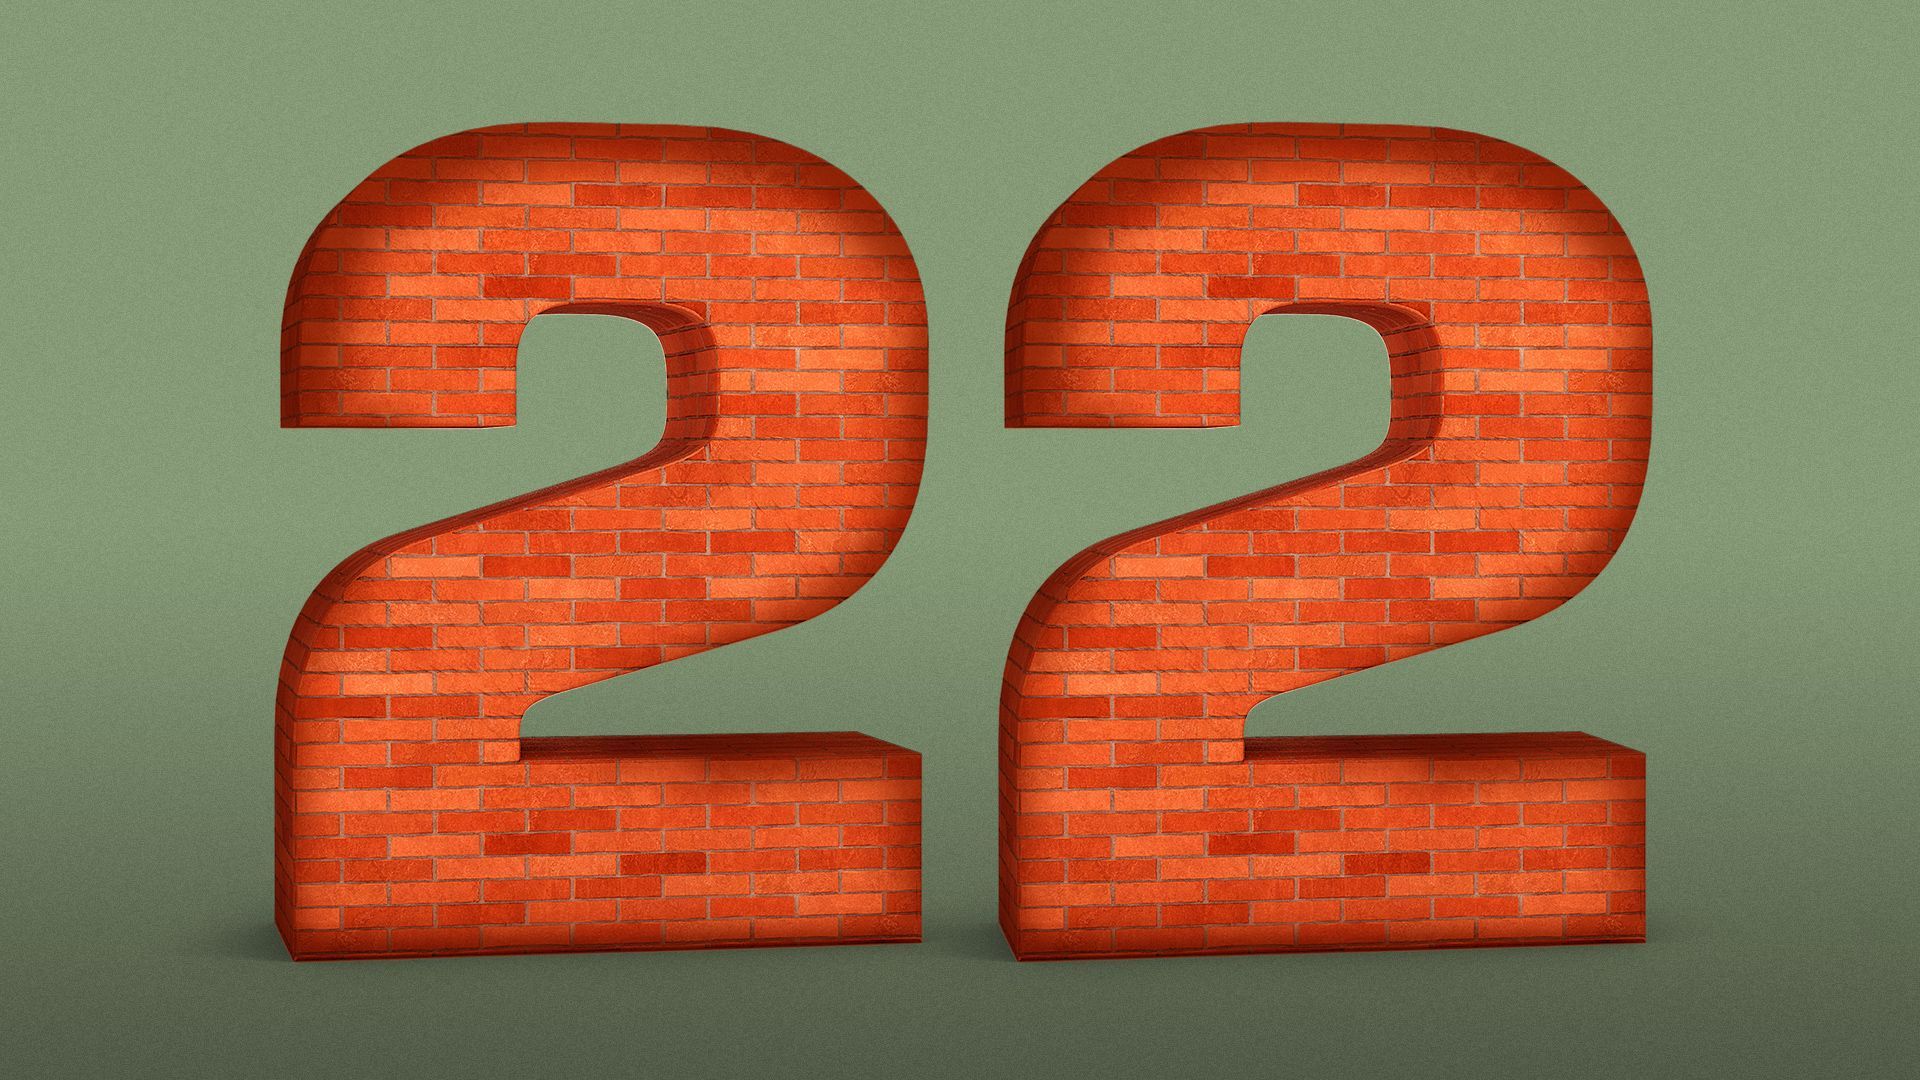 Illustration of the number "22" made out of bricks as if the characters were brick walls. 